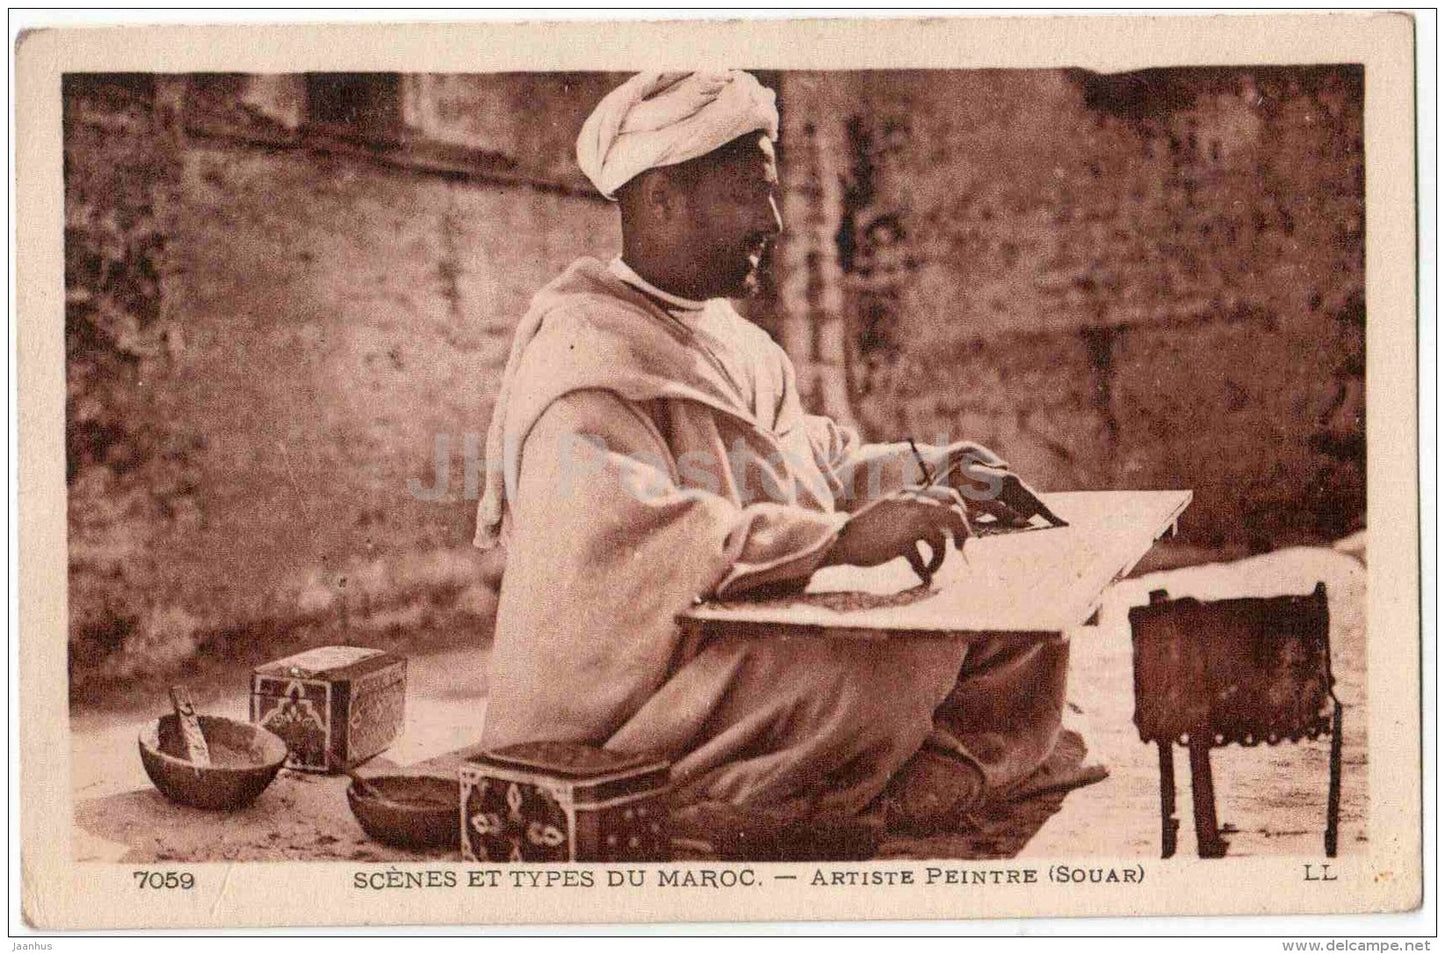 Scenes et Types dy Maroc - Artiste Peintre (Souar) - Scenes and Types of Morocco - Painter Morocco - old postcard - used - JH Postcards